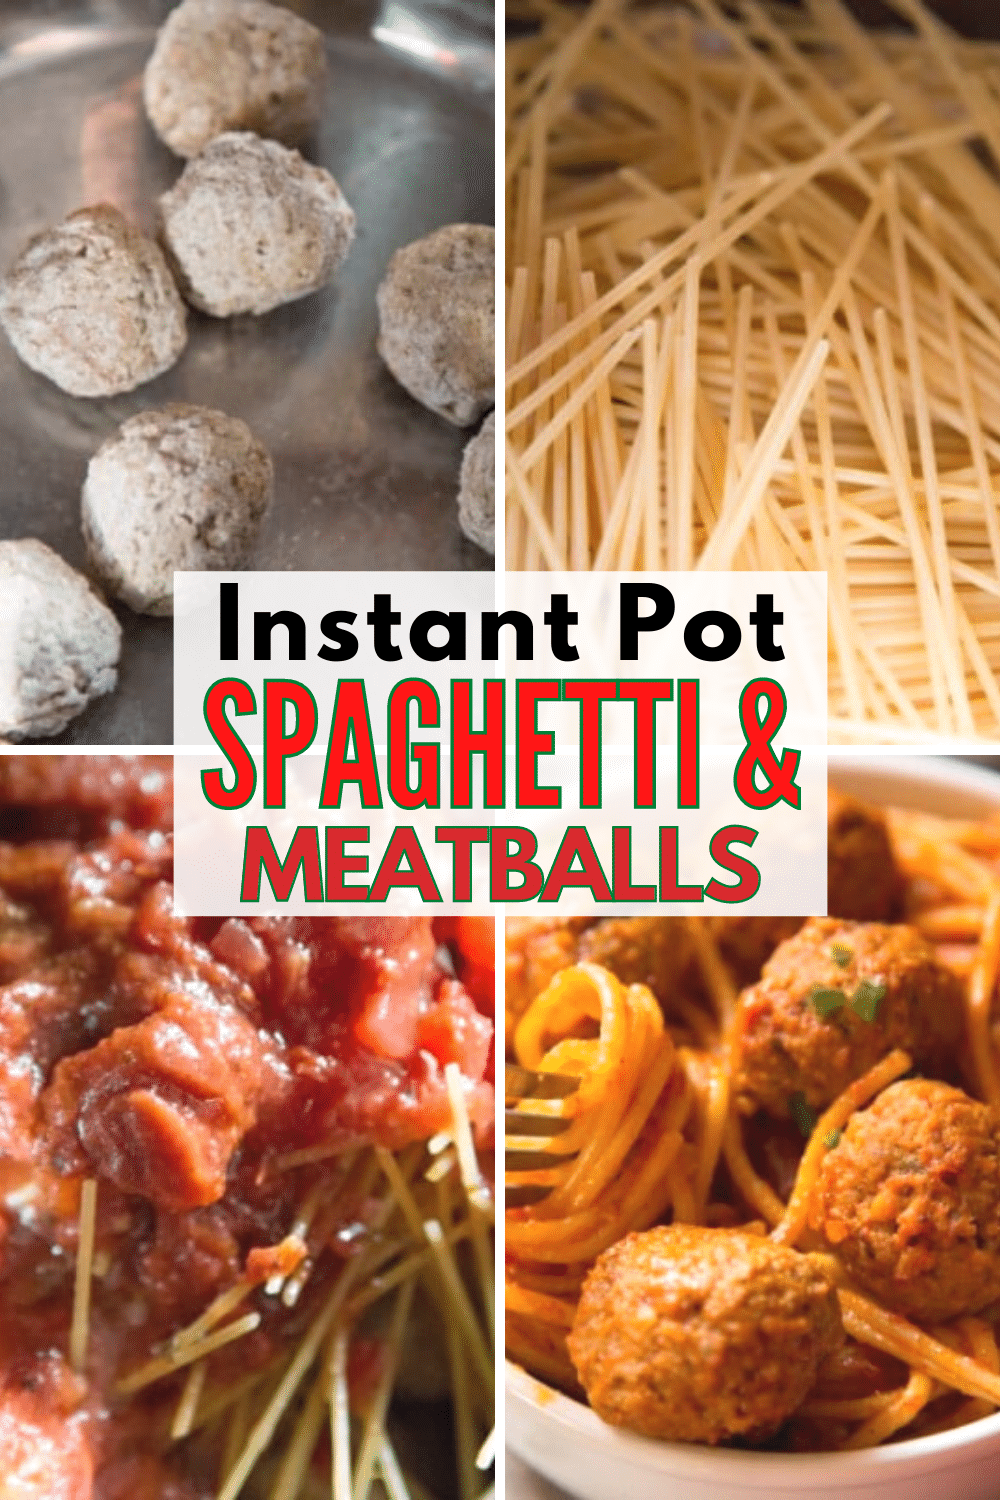 Instant Pot Spaghetti and Meatballs is the perfect meal for busy weeknights when you need a fast, easy dinner the kids will eat without complaints! This recipe is super simple and you can always keep the ingredients on hand so you'll never be tempted to hit the drive-through or order in. #instantpotrecipes #easydinner #spaghettiandmeatballs via @wondermomwannab